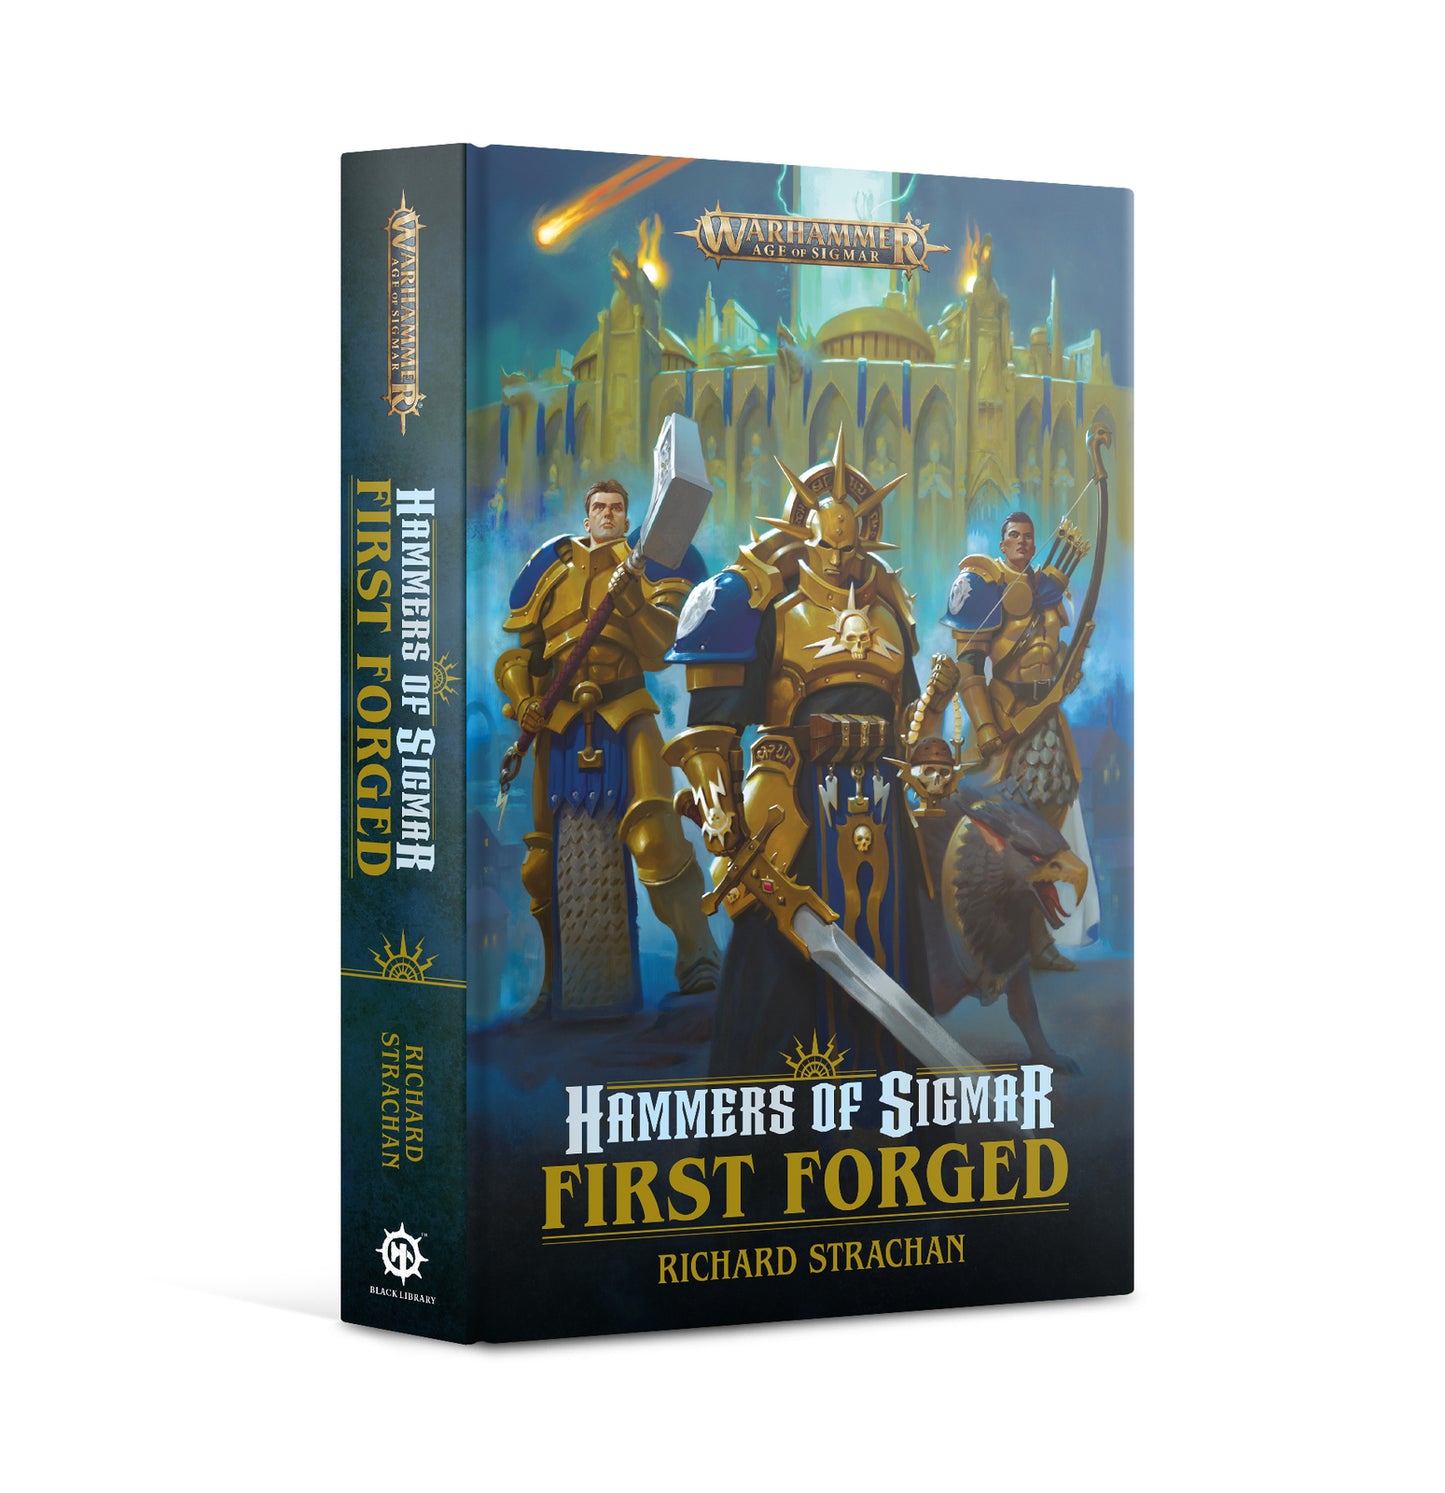 Hammers of Sigmar: First Forged (Hb)